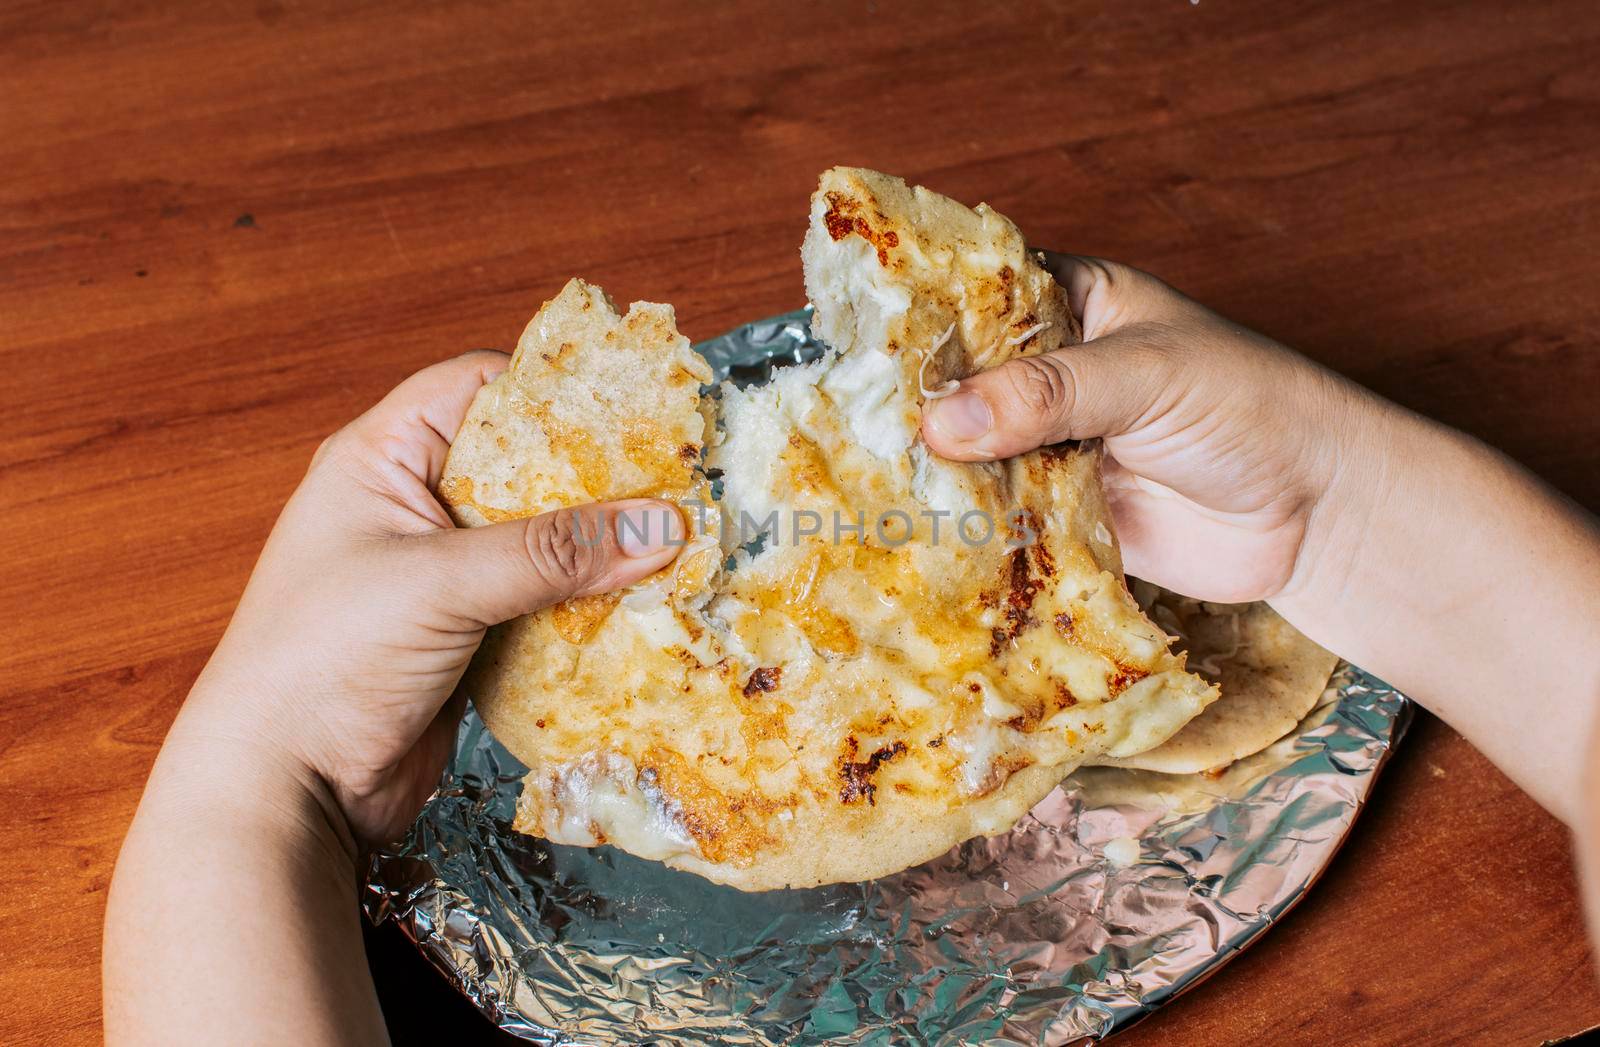 Hands dividing delicious Nicaraguan pupusa on the table, View of hands dividing delicious Salvadoran pupusas on wooden table. Concept of traditional handmade pupusas by isaiphoto